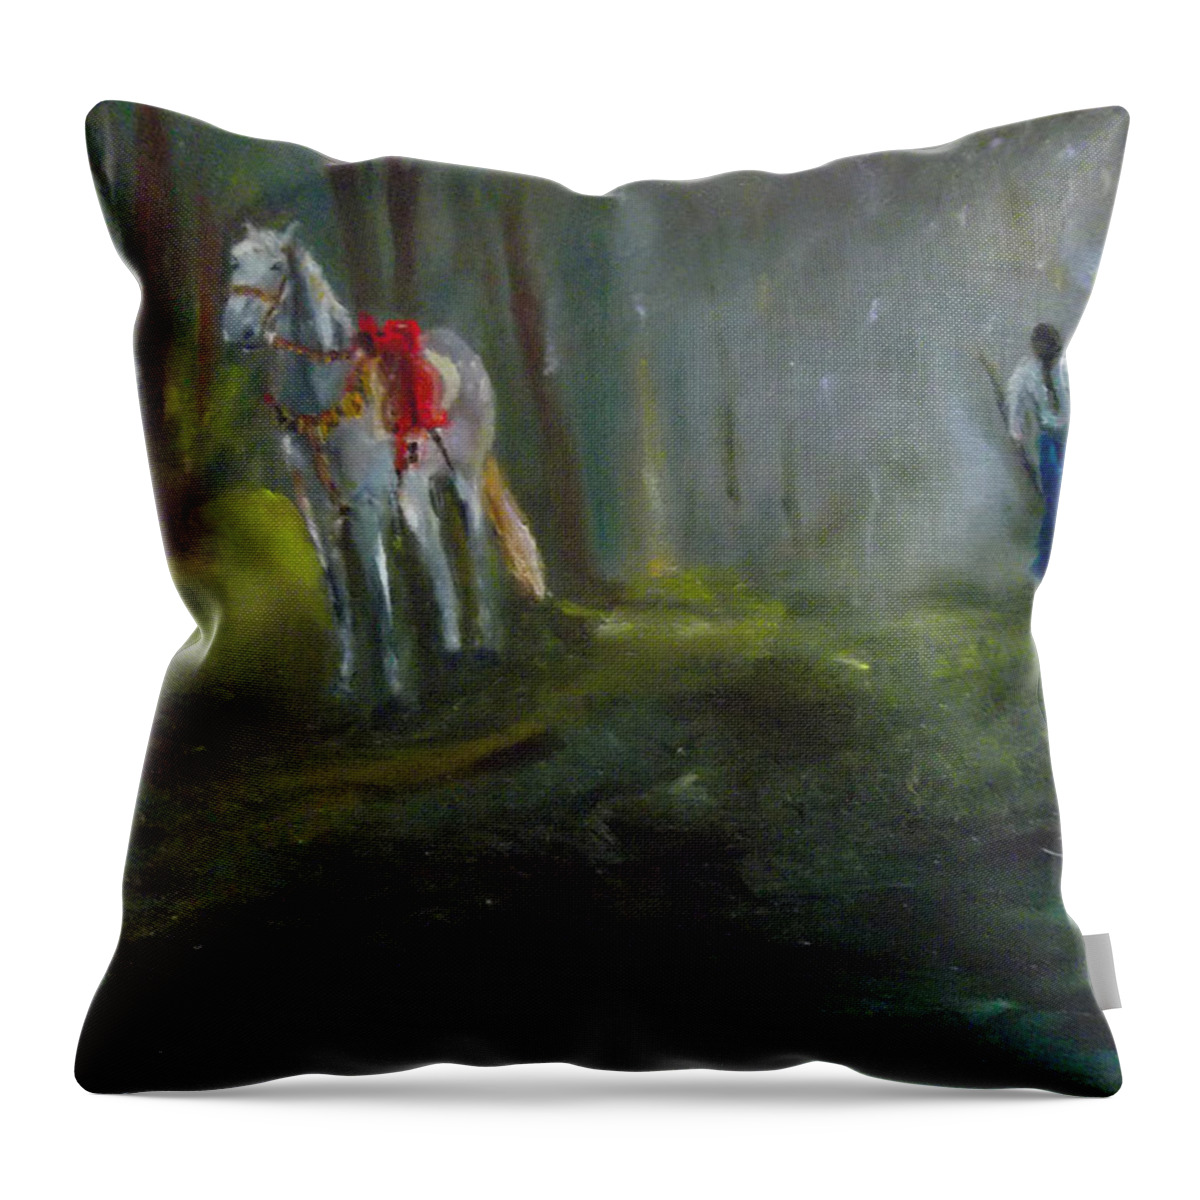 Horse Throw Pillow featuring the painting The Seeker II by Susan Esbensen